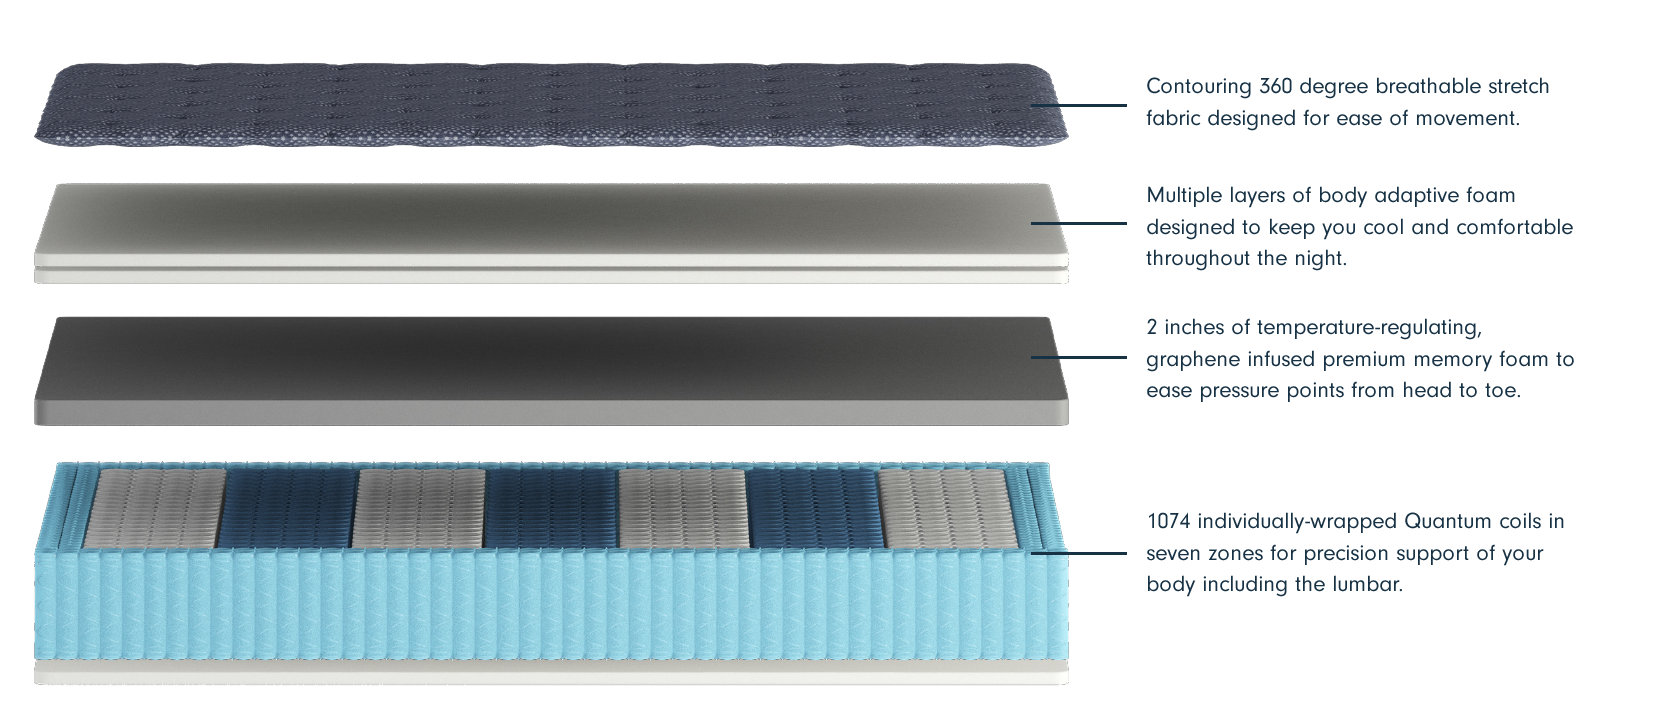 The LuuF firm mattress offers the most support while still remaining a plush bed at heart. The Best Hybrid Mattress for firm lovers. Not ideal for side sleepers.